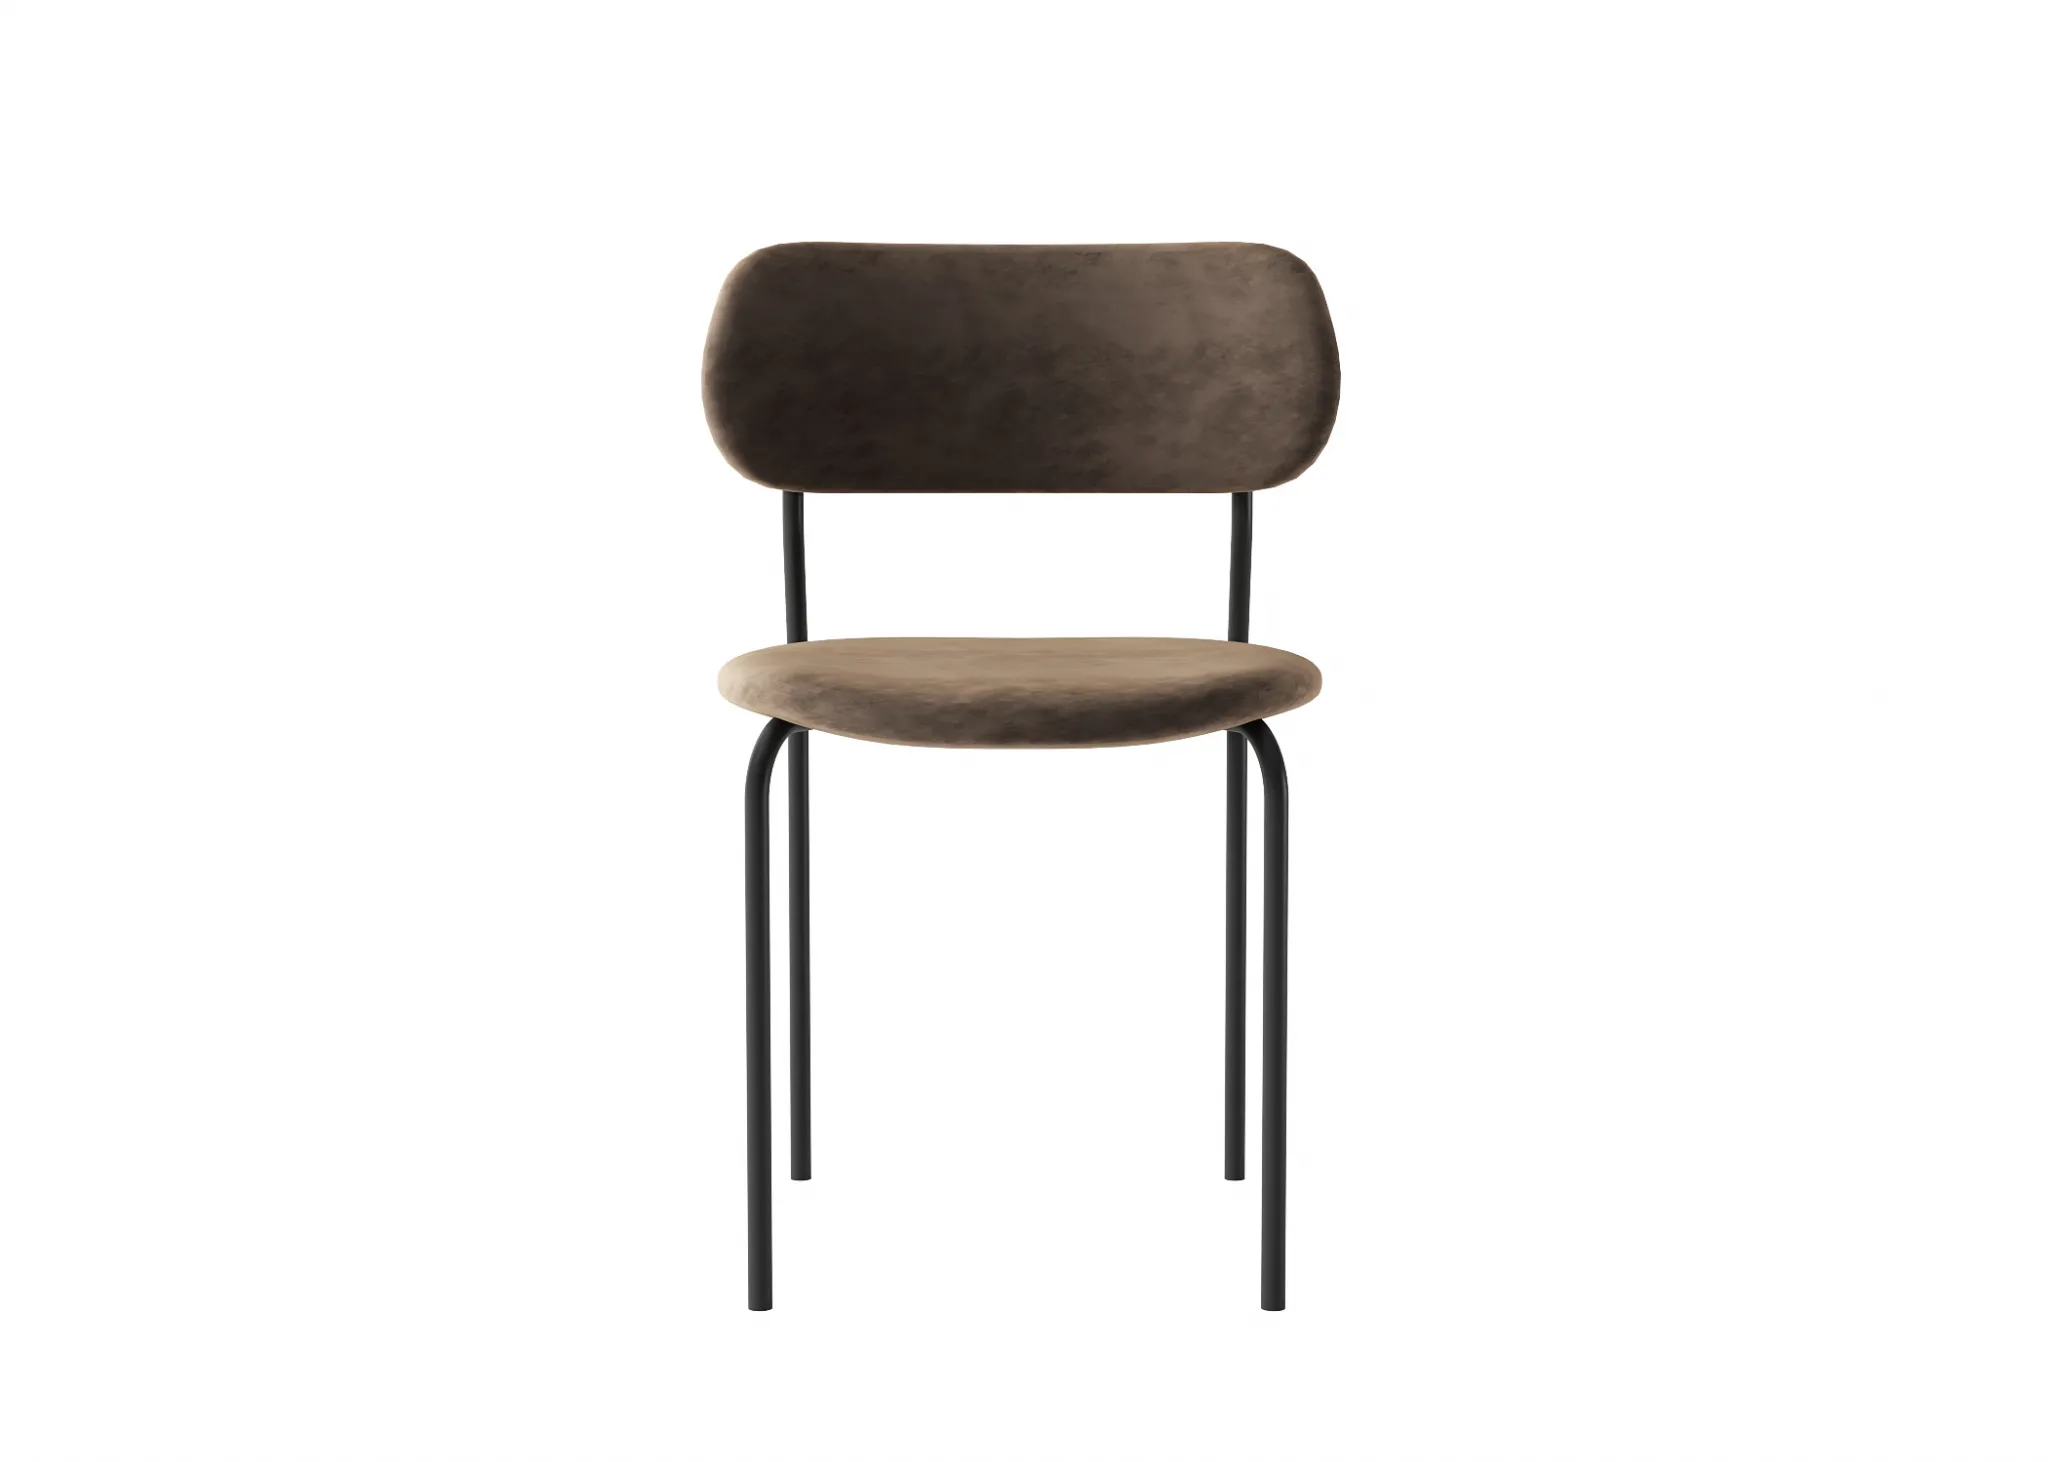 FURNITURE 3D MODELS – CHAIRS – 0492